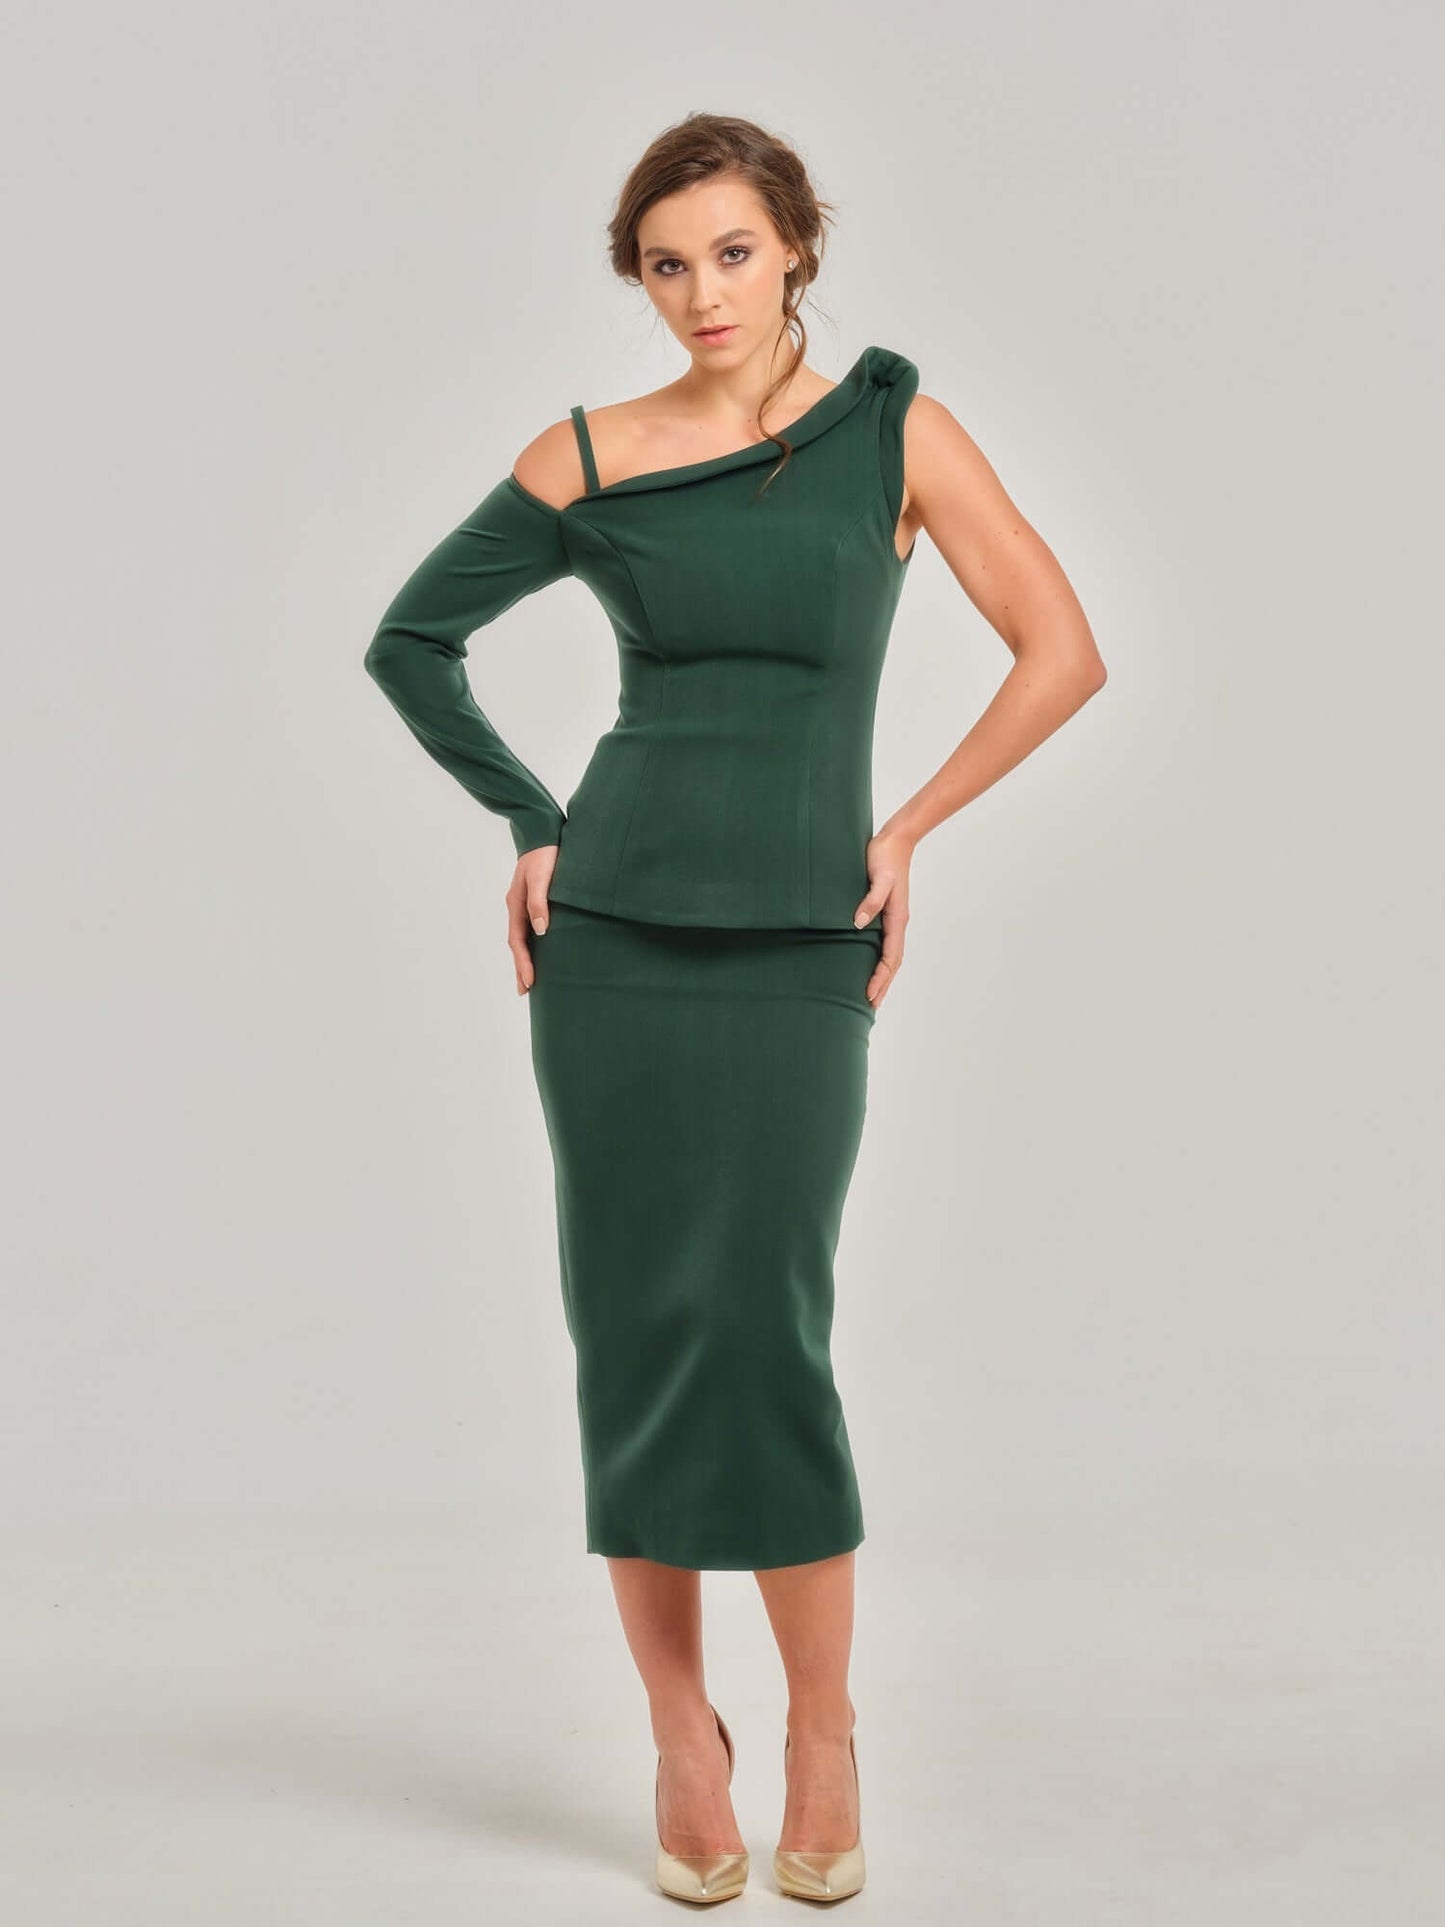 Tia Dorraine Emerald Dream Pencil High-Waist Midi Skirt This classic piece is a must-have for the modern businesswoman’s wardrobe. This emerald green pencil skirt with its midi length is a great addition to your office wear collection.